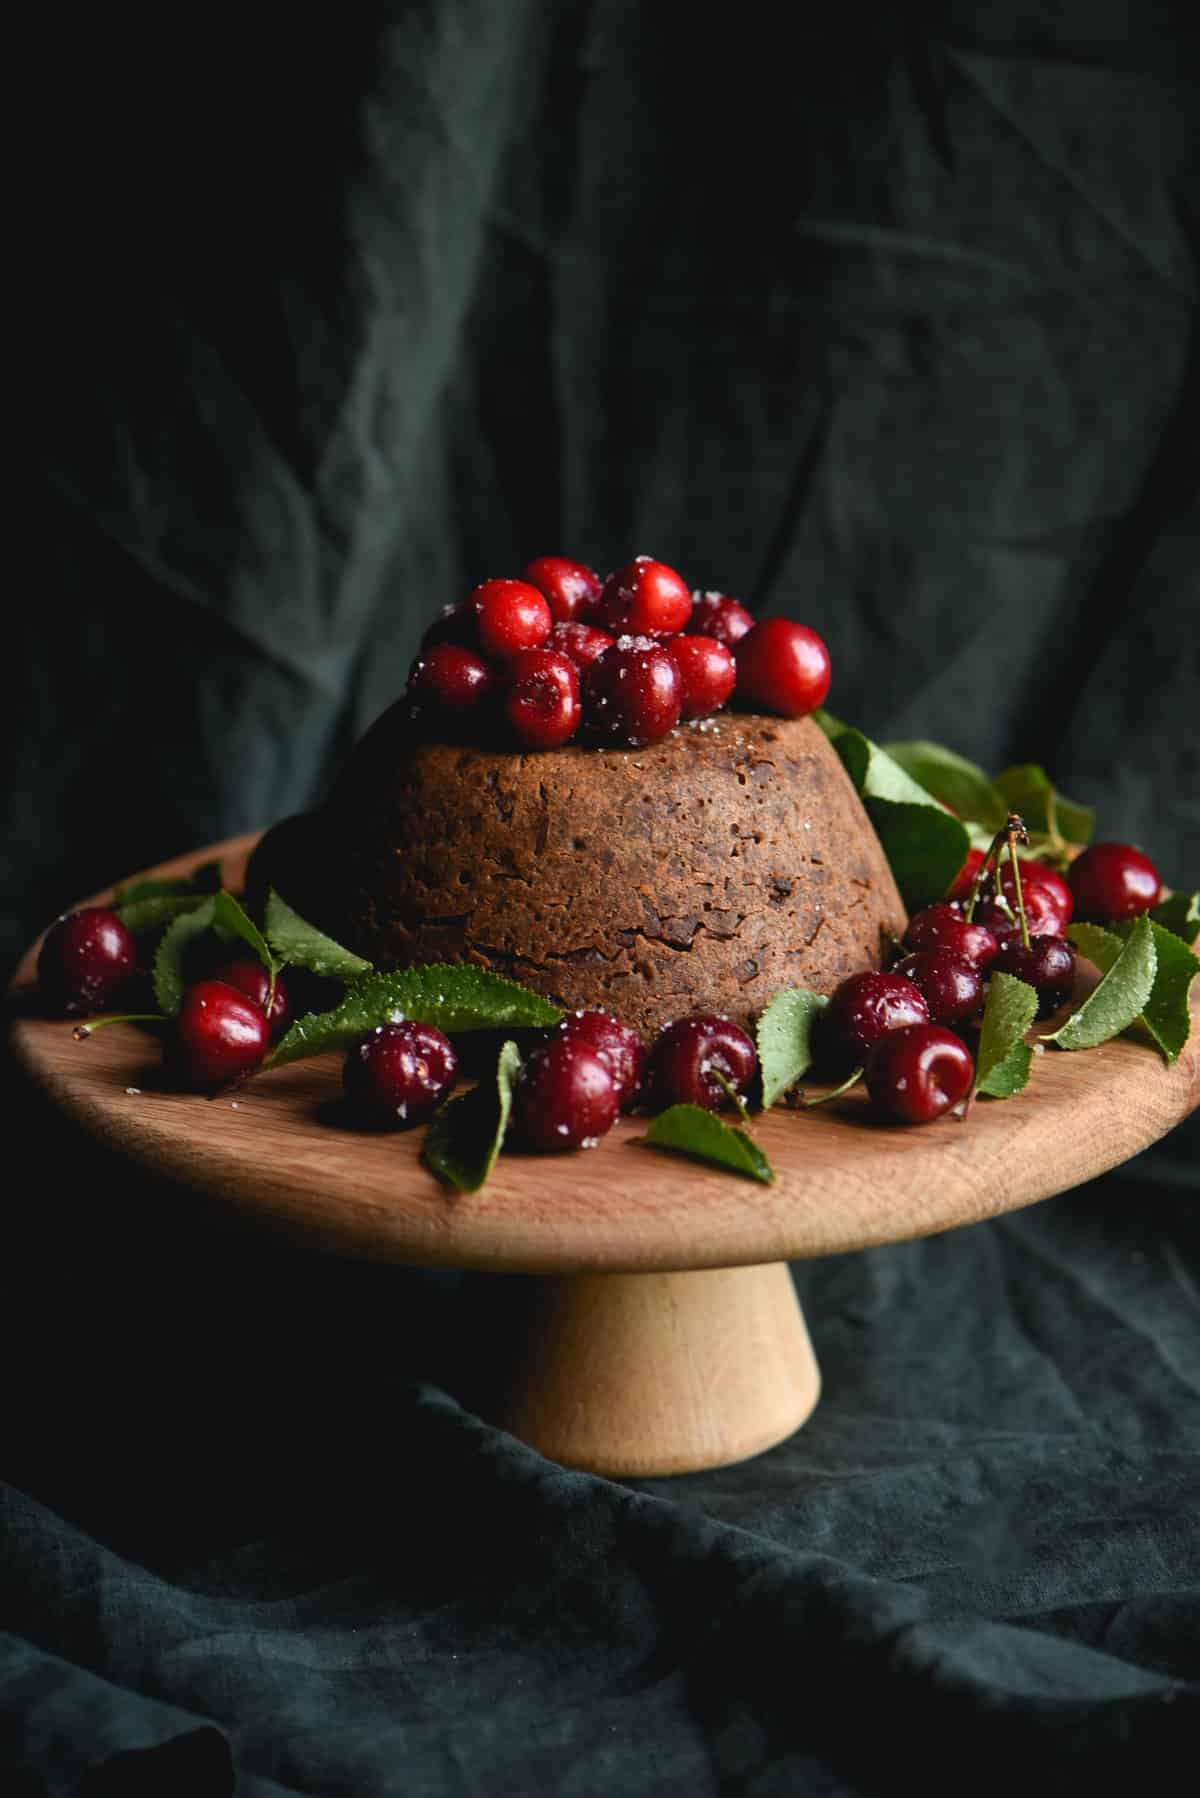 A side on view of a fruitless Christmas pudding topped with cherries against a green backdrop